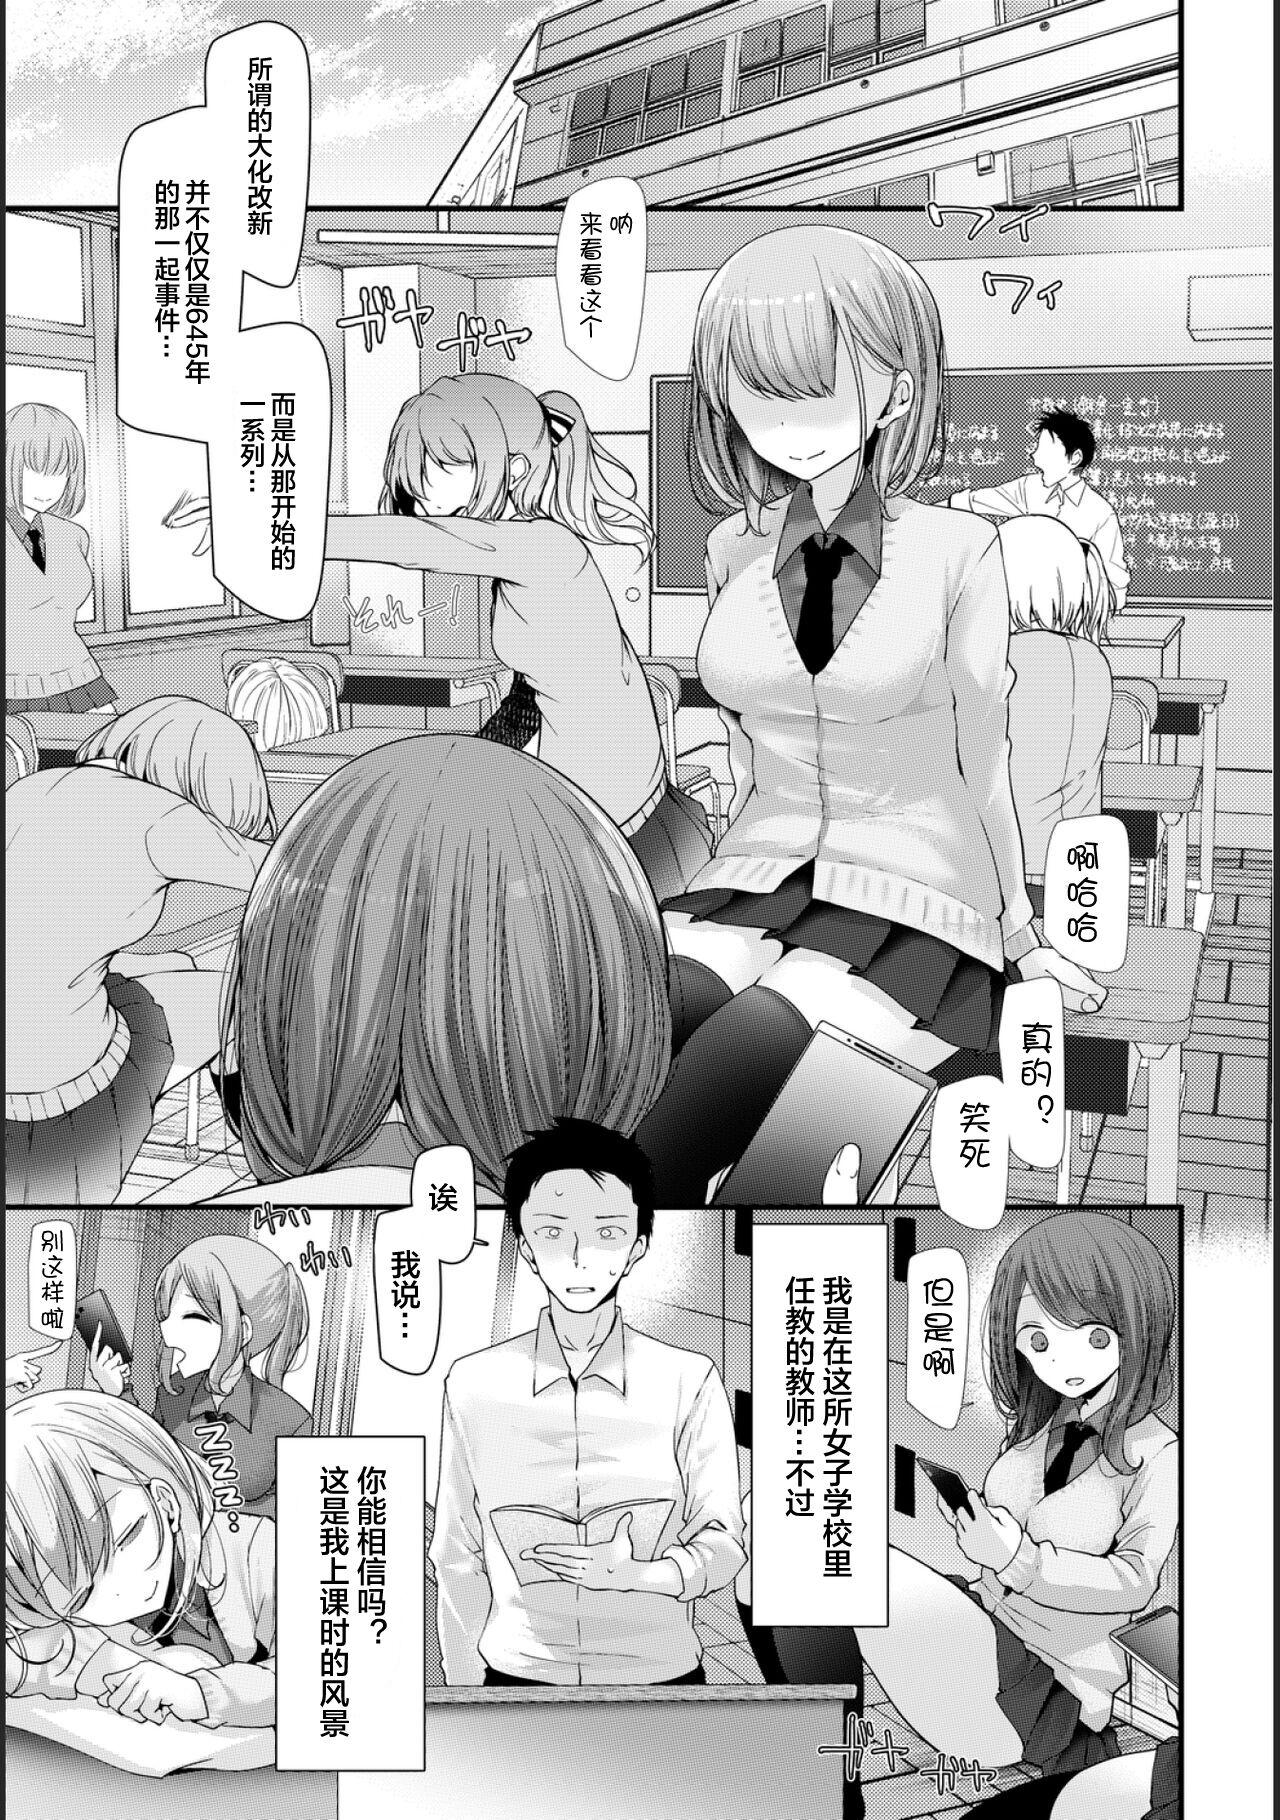 Oldvsyoung [Oouso] Onaho Kyoushitsu -Shingakki- Lesson 1 [Chinese] [下北泽幕府] [Digital] Special Locations - Page 5